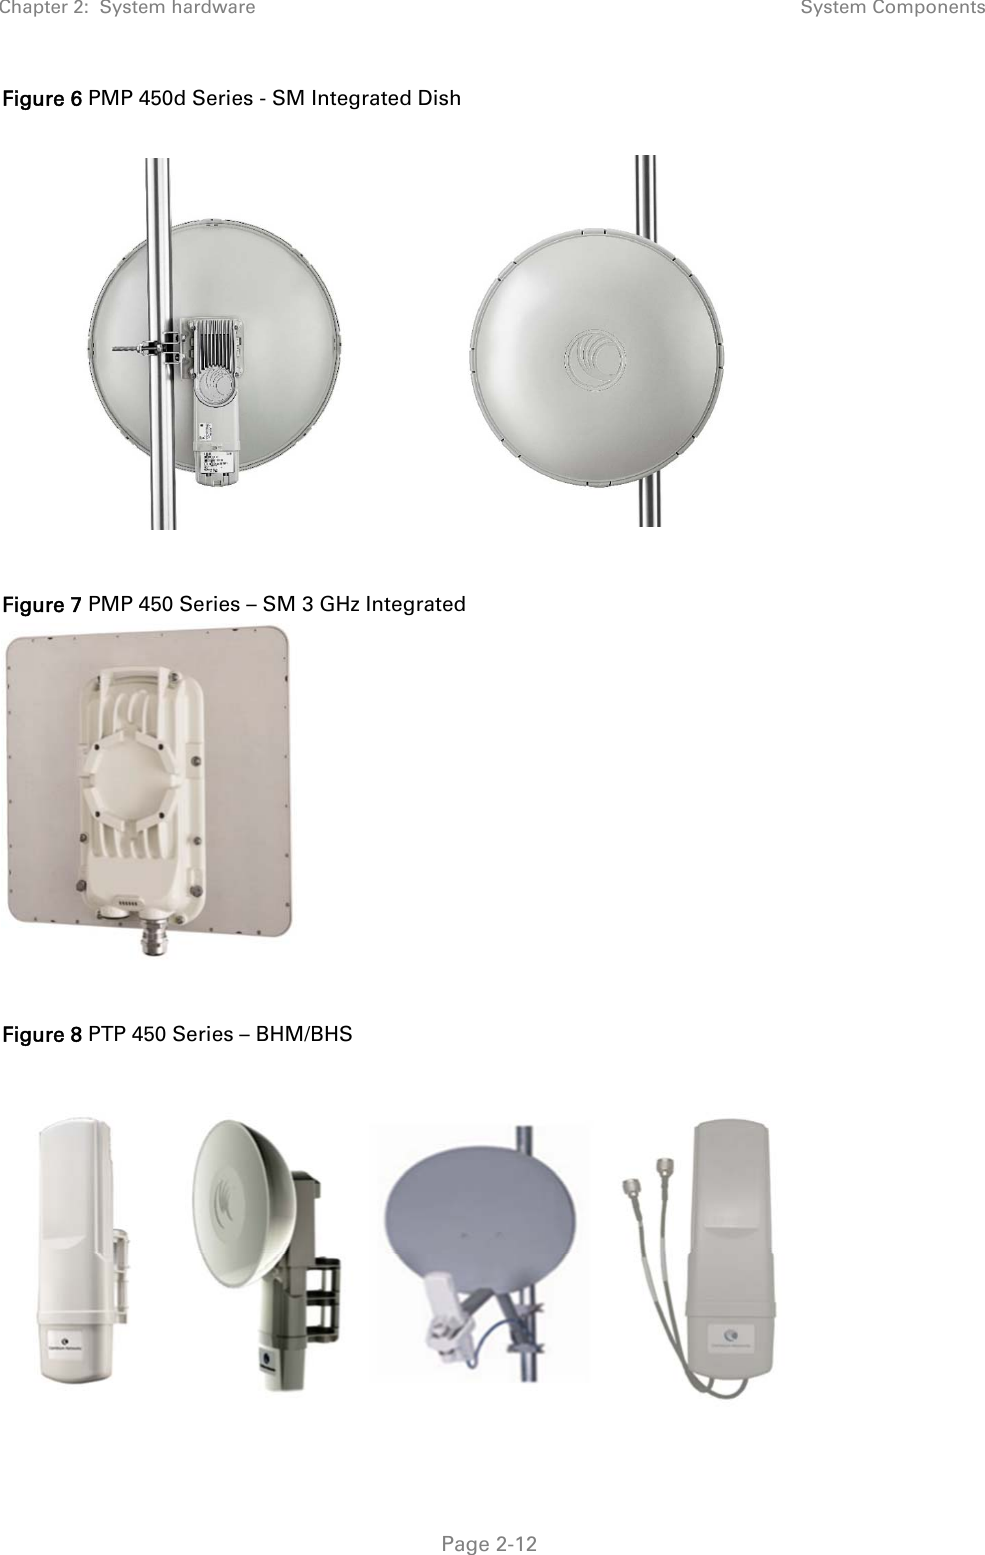 Chapter 2:  System hardware  System Components   Page 2-12 Figure 6 PMP 450d Series - SM Integrated Dish    Figure 7 PMP 450 Series – SM 3 GHz Integrated    Figure 8 PTP 450 Series – BHM/BHS   